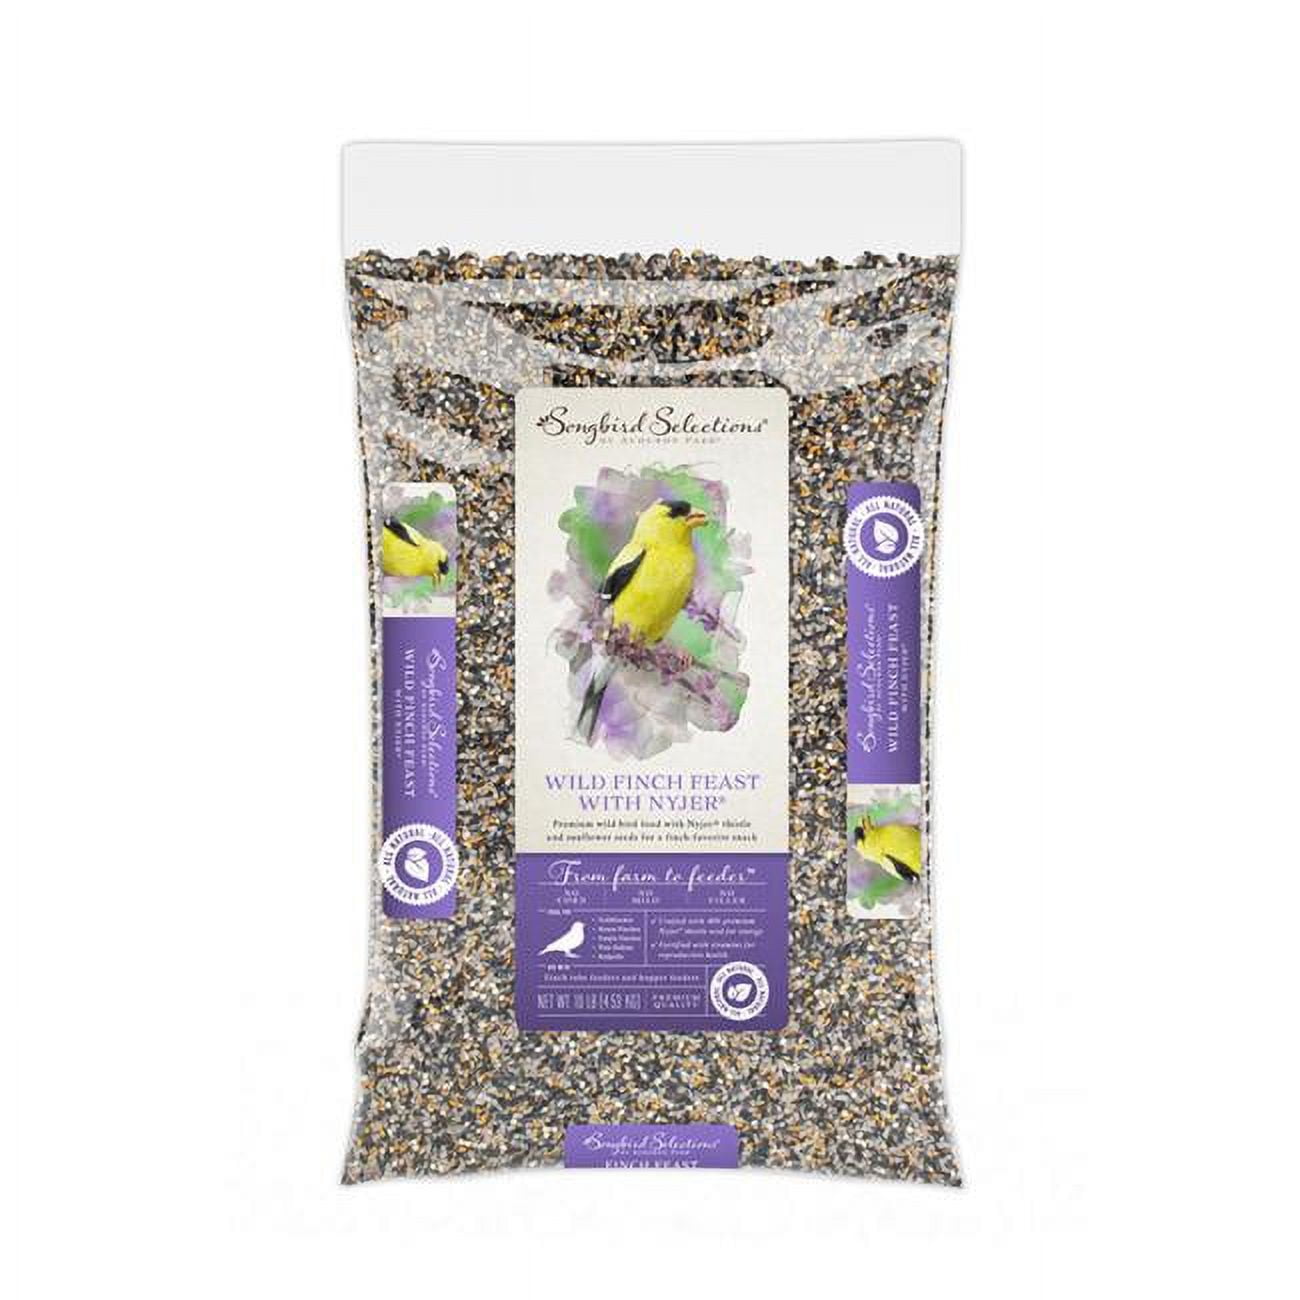 Global Harvest Foods 10 llbs Songbird Selections Finches Wild Bird Food Nyjer Seed